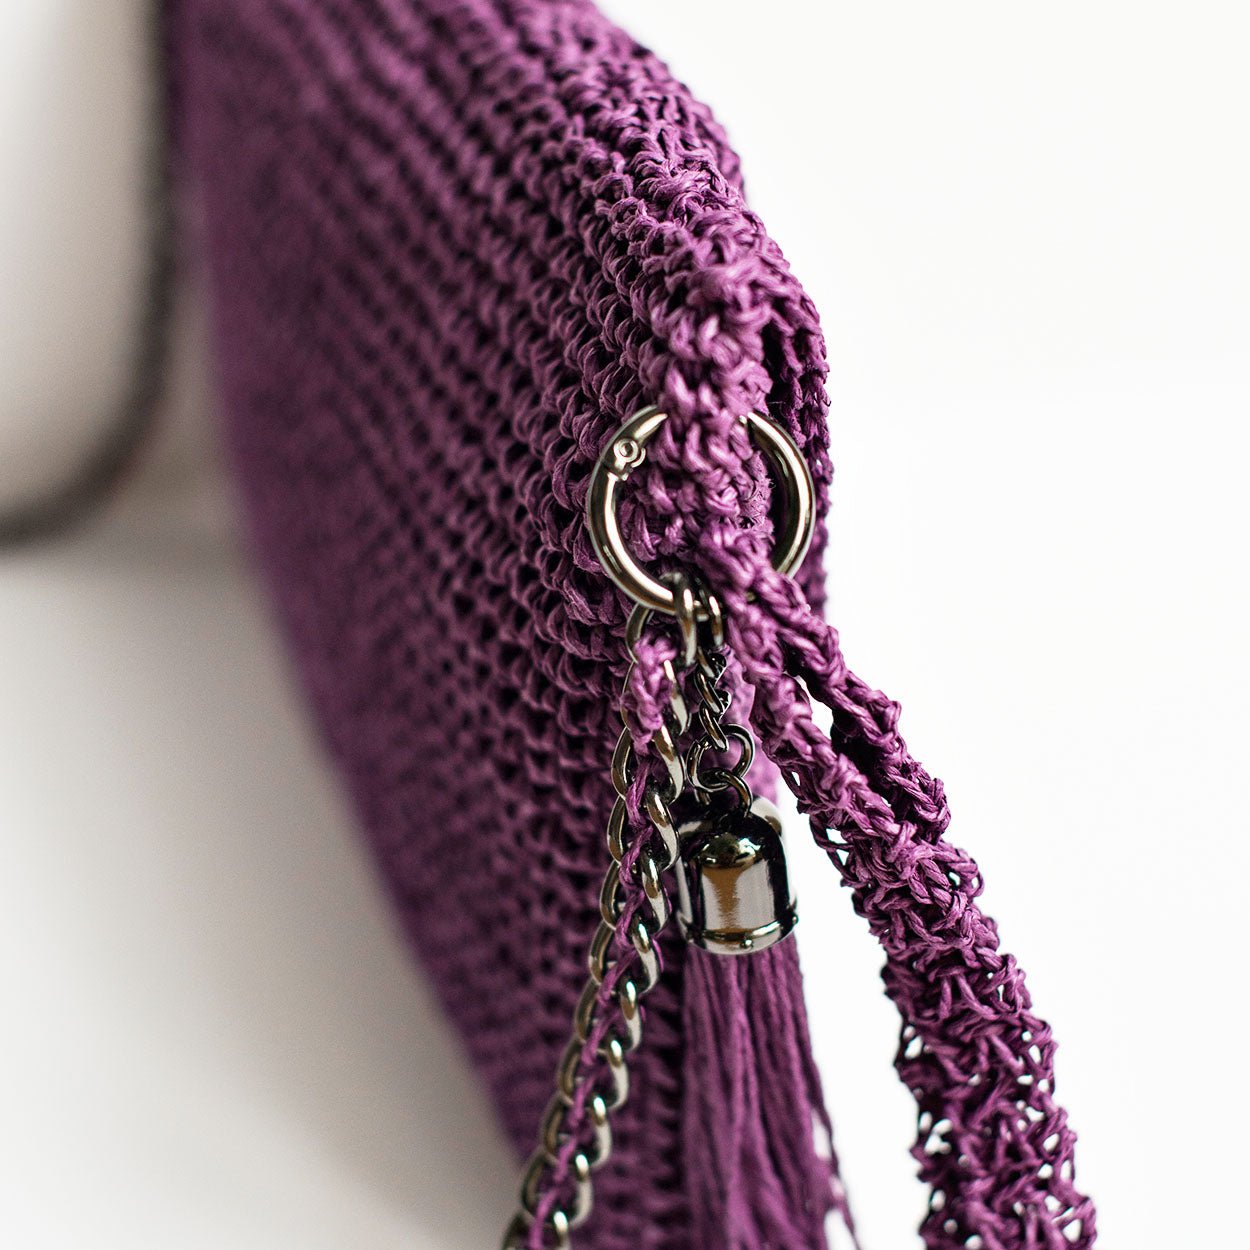 Grace Bag hand crocheted with sustainable paper yarn - Purple - SJW BAGS LONDON